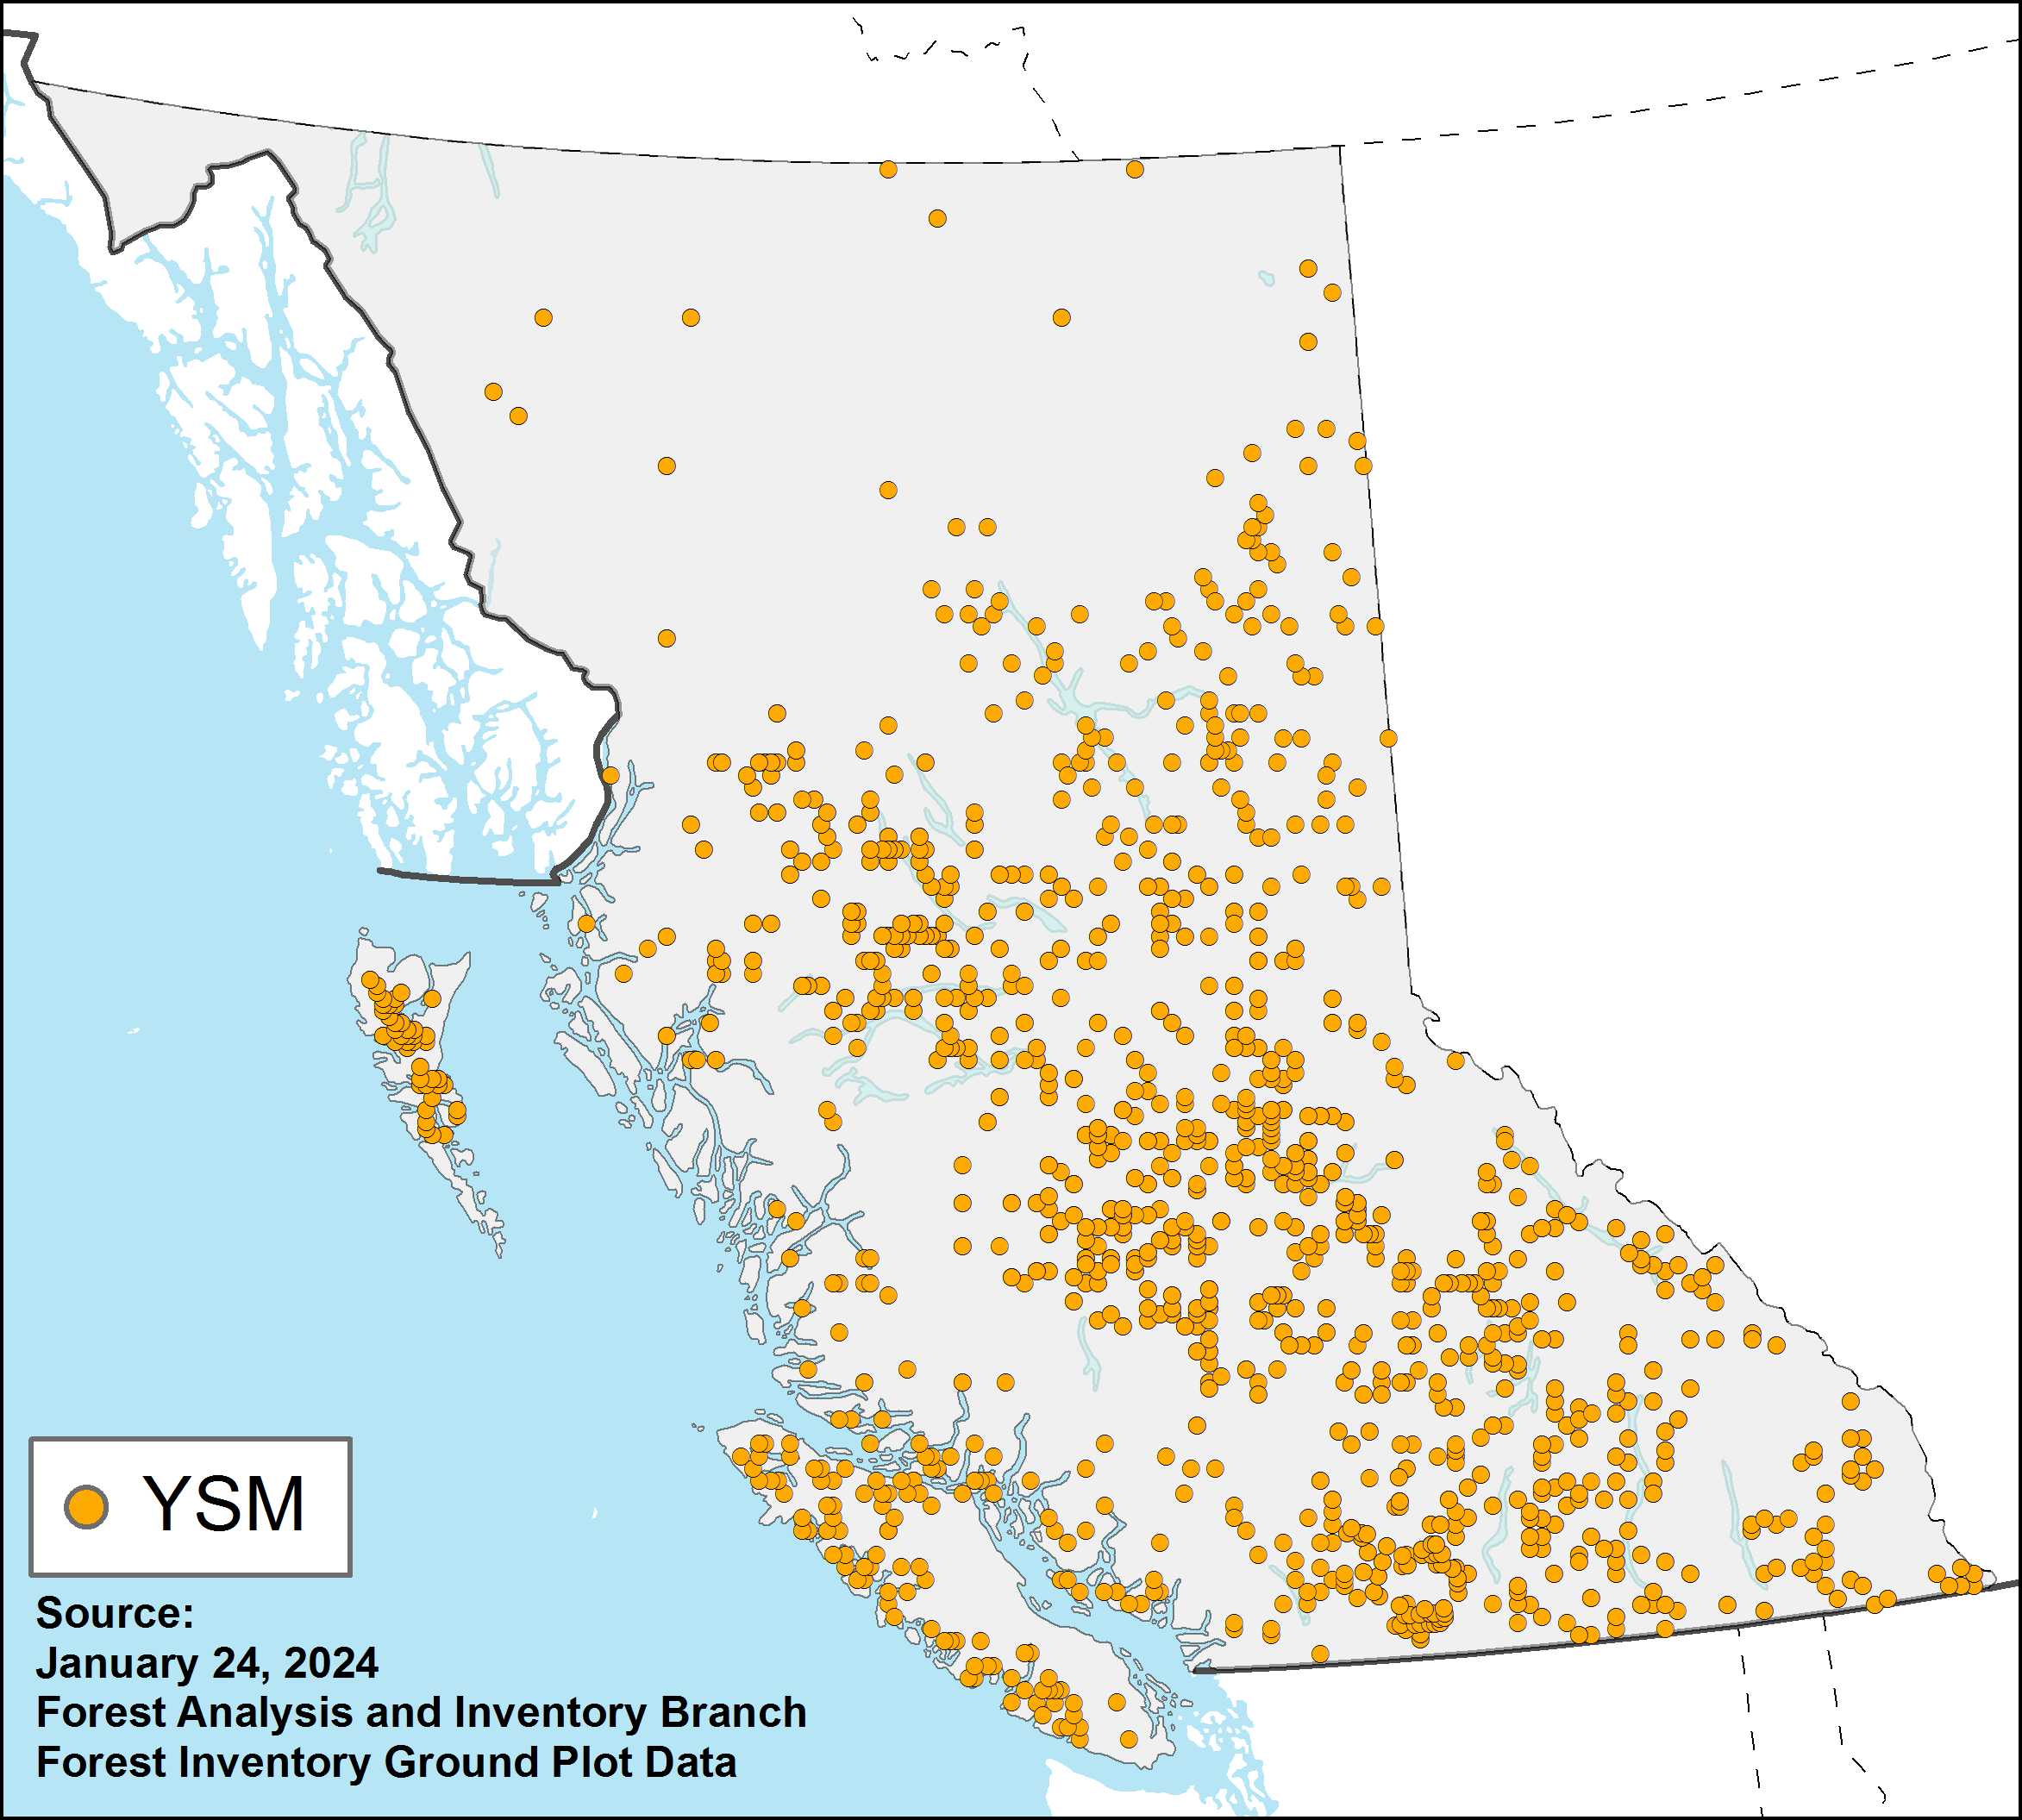 Map of British Columbia that indicates the locations of Young Stand Monitoring plots.